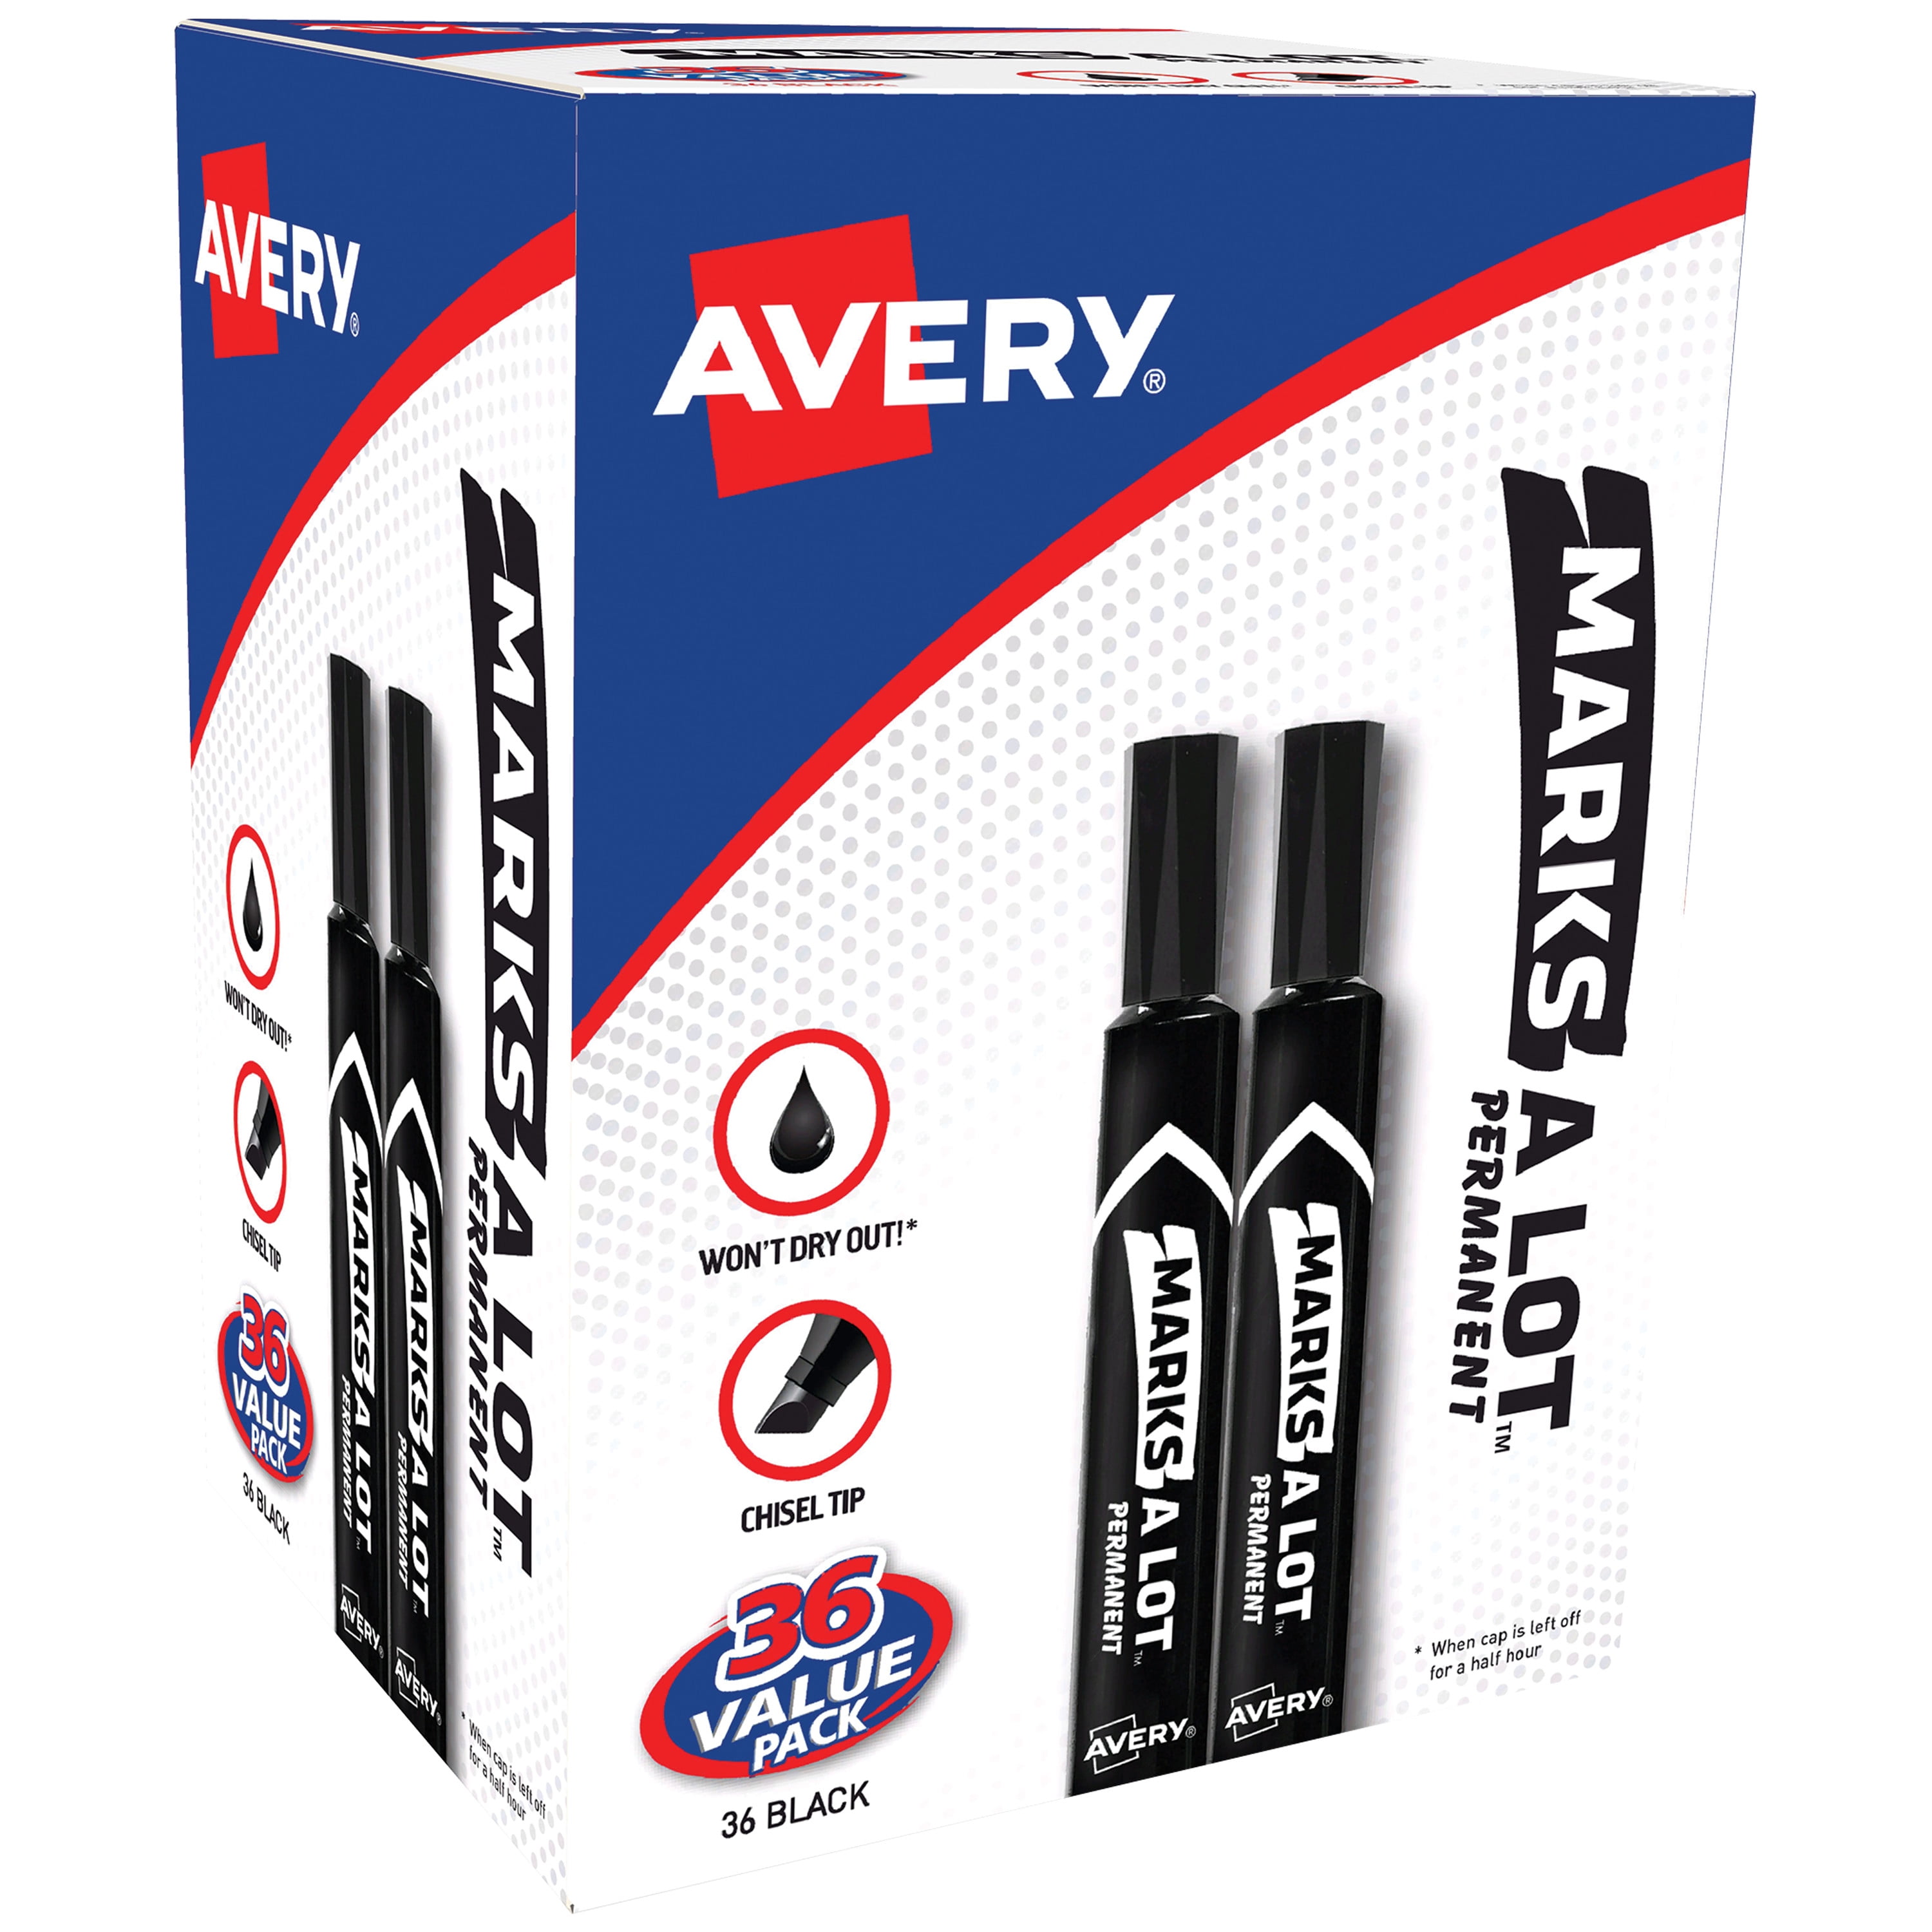 Avery - Help keep your office clean by labeling pen containers